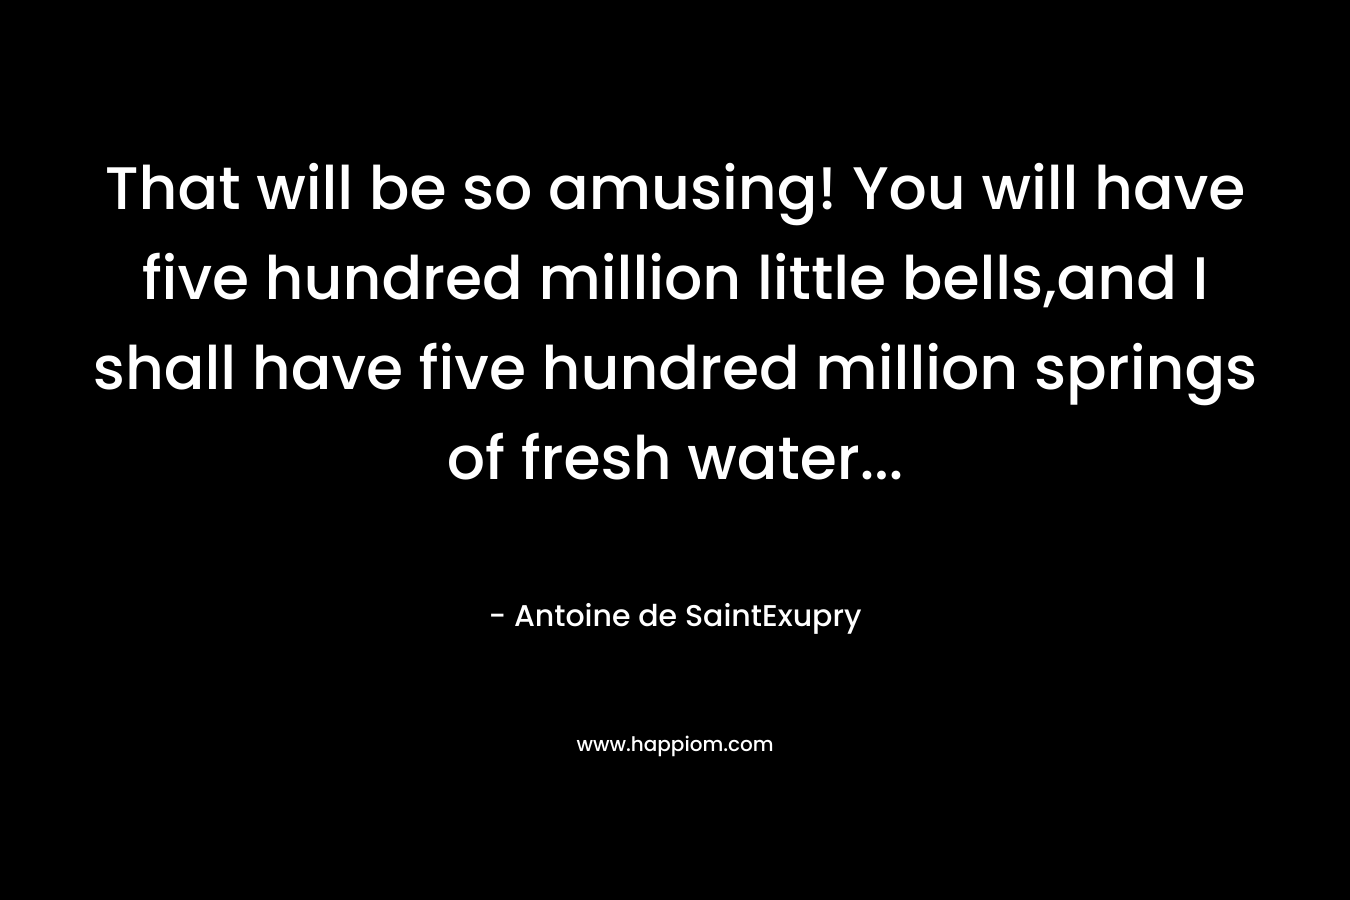 That will be so amusing! You will have five hundred million little bells,and I shall have five hundred million springs of fresh water...